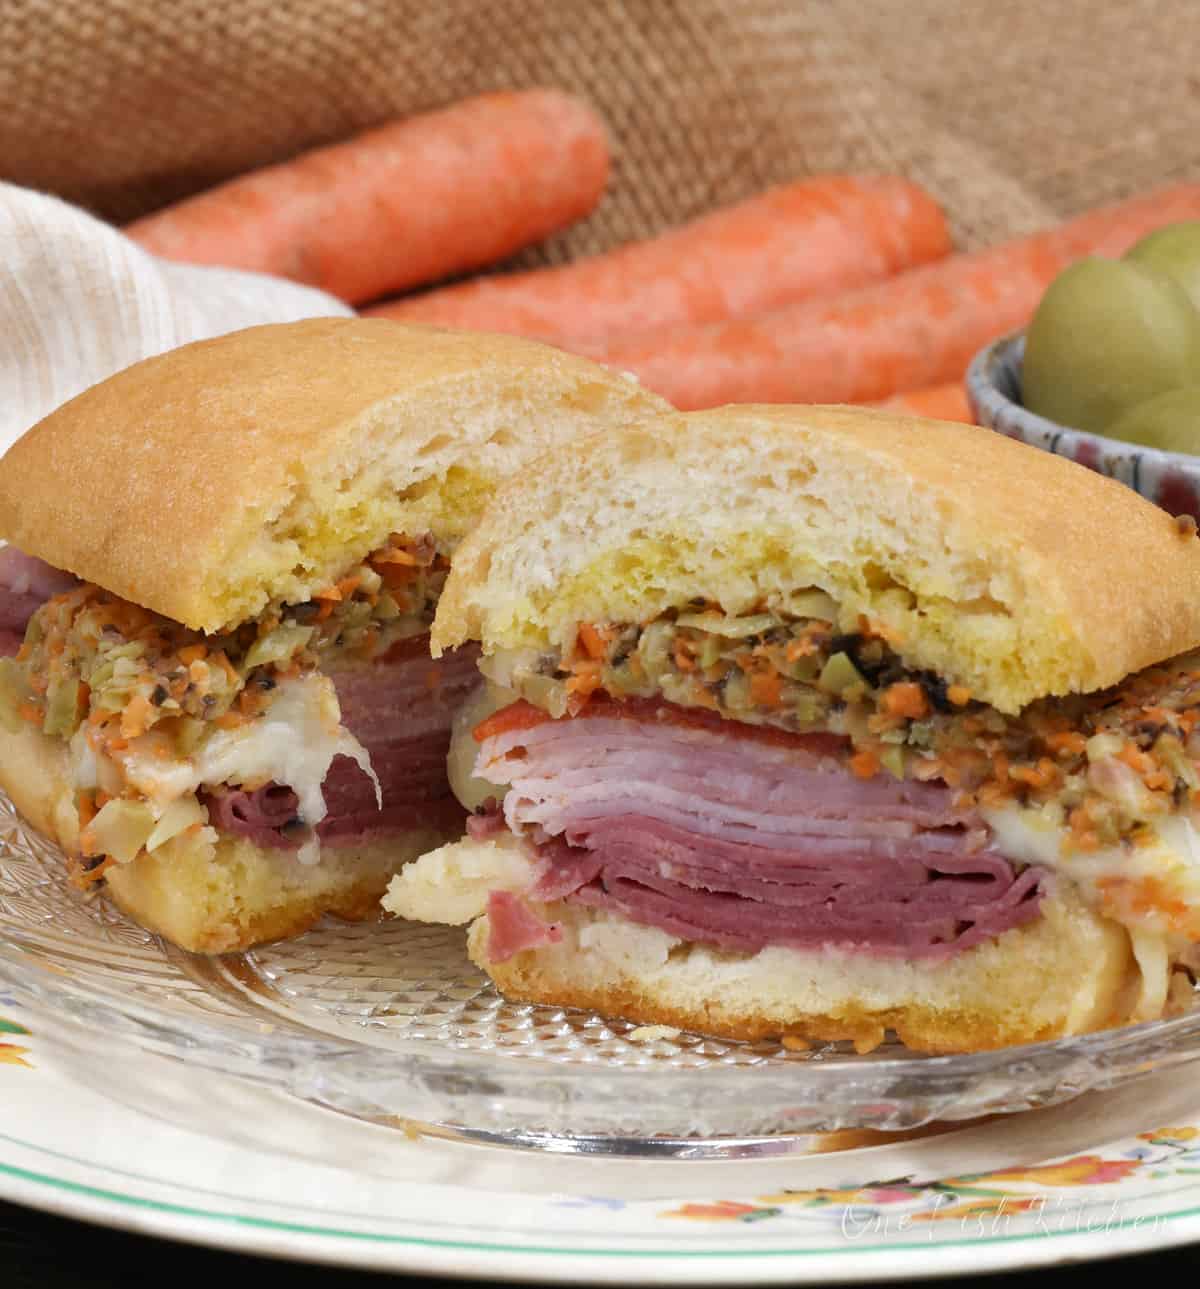 a muffuletta sliced in half next to 3 carrots and a bowl of olives.